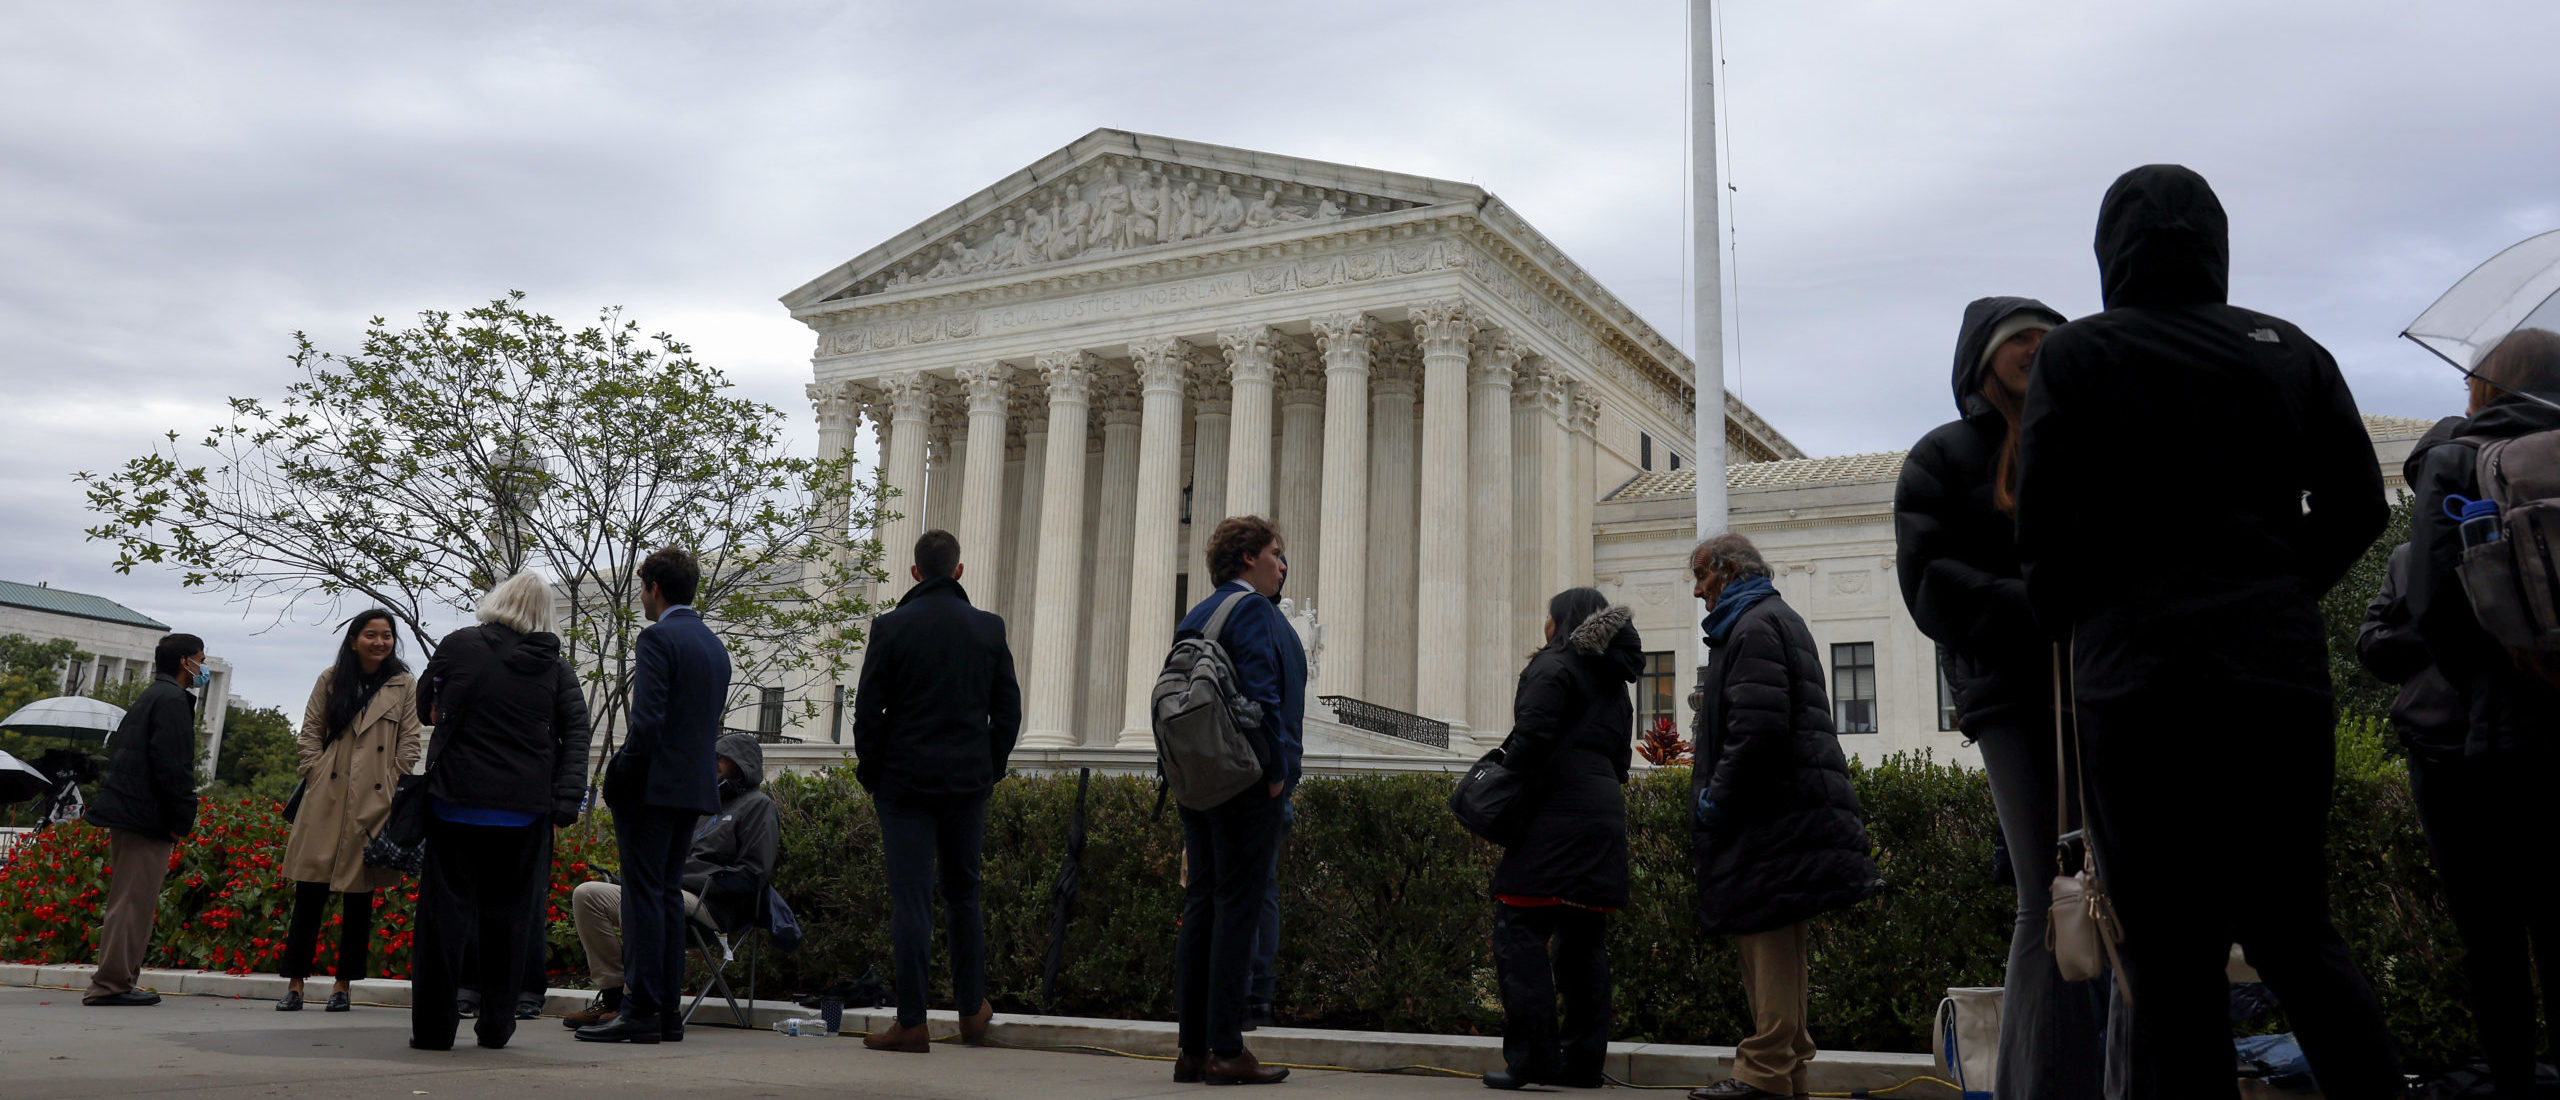 People wait in line outside the U.S. Supreme Court Building to hear oral arguments on October 03, 2022 in Washington, DC. (Photo by Anna Moneymaker/Getty Images)